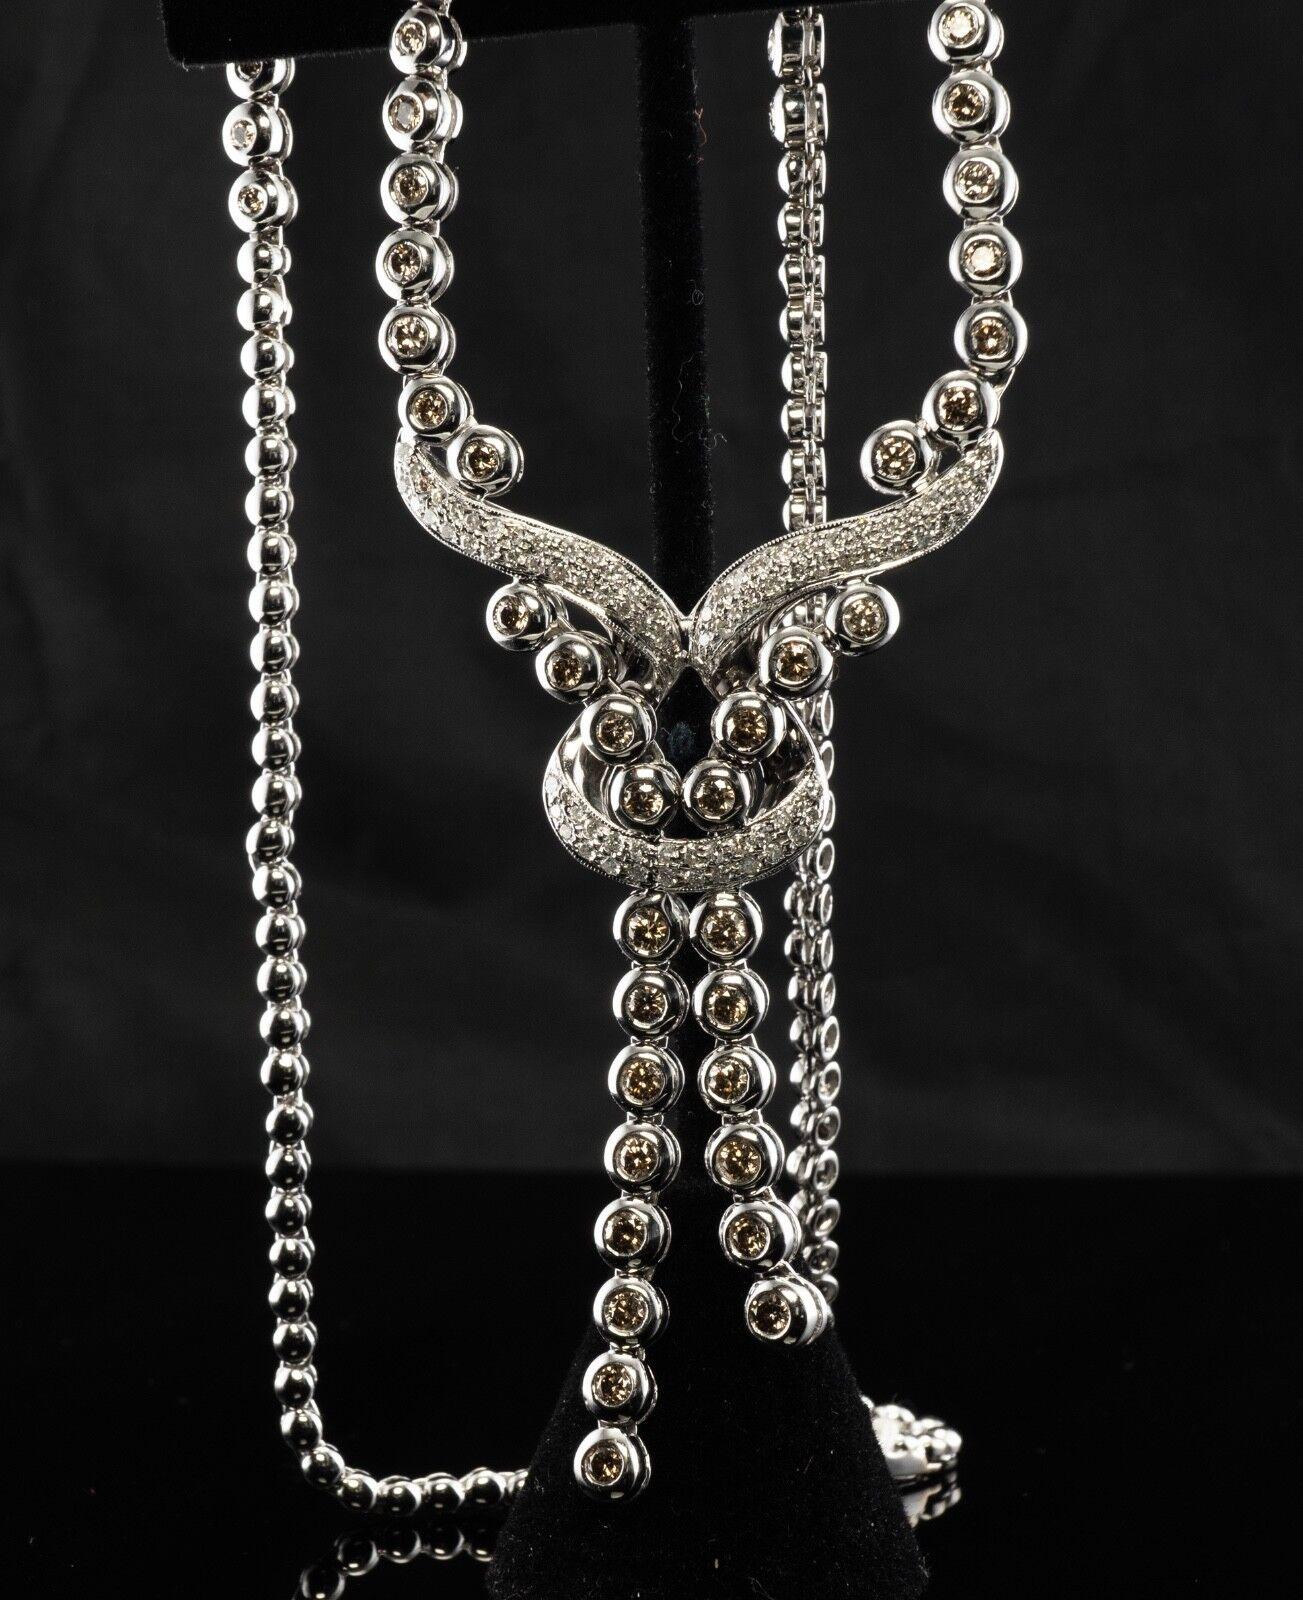 White & Champagne Diamond Necklace 18K Gold 3.84 TDW For Sale 6